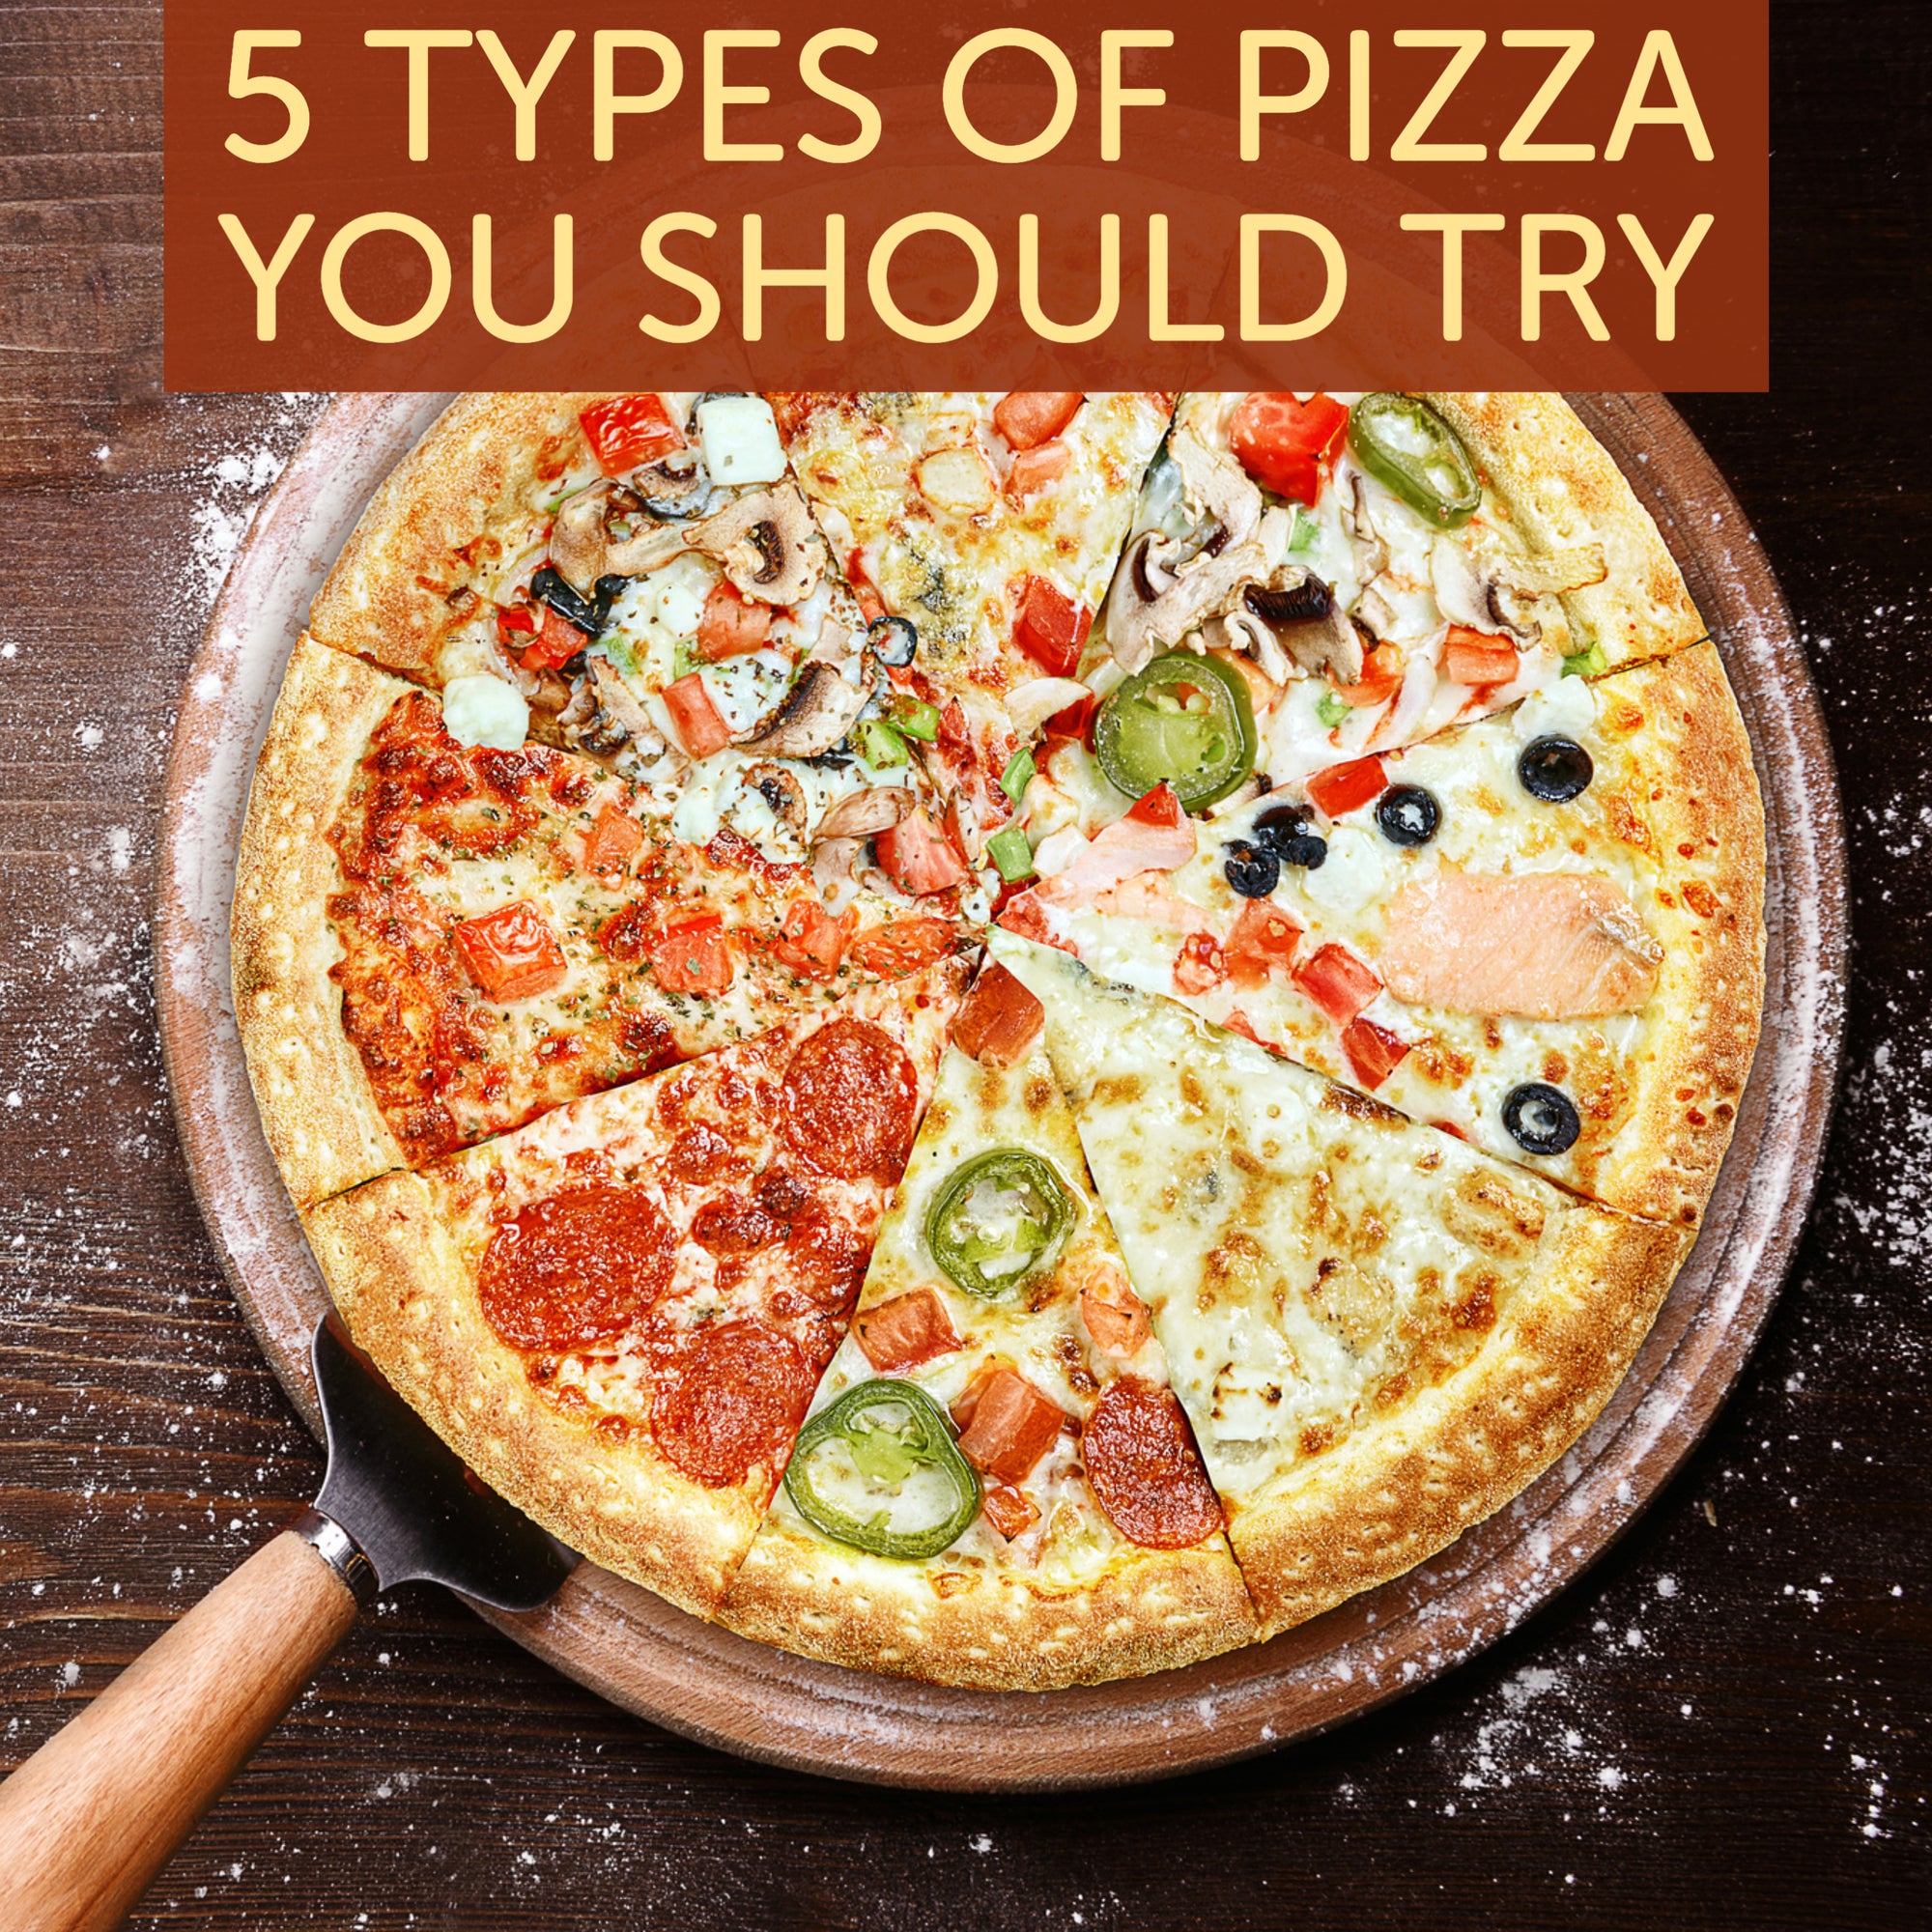 5 Types of Pizza You Should Try